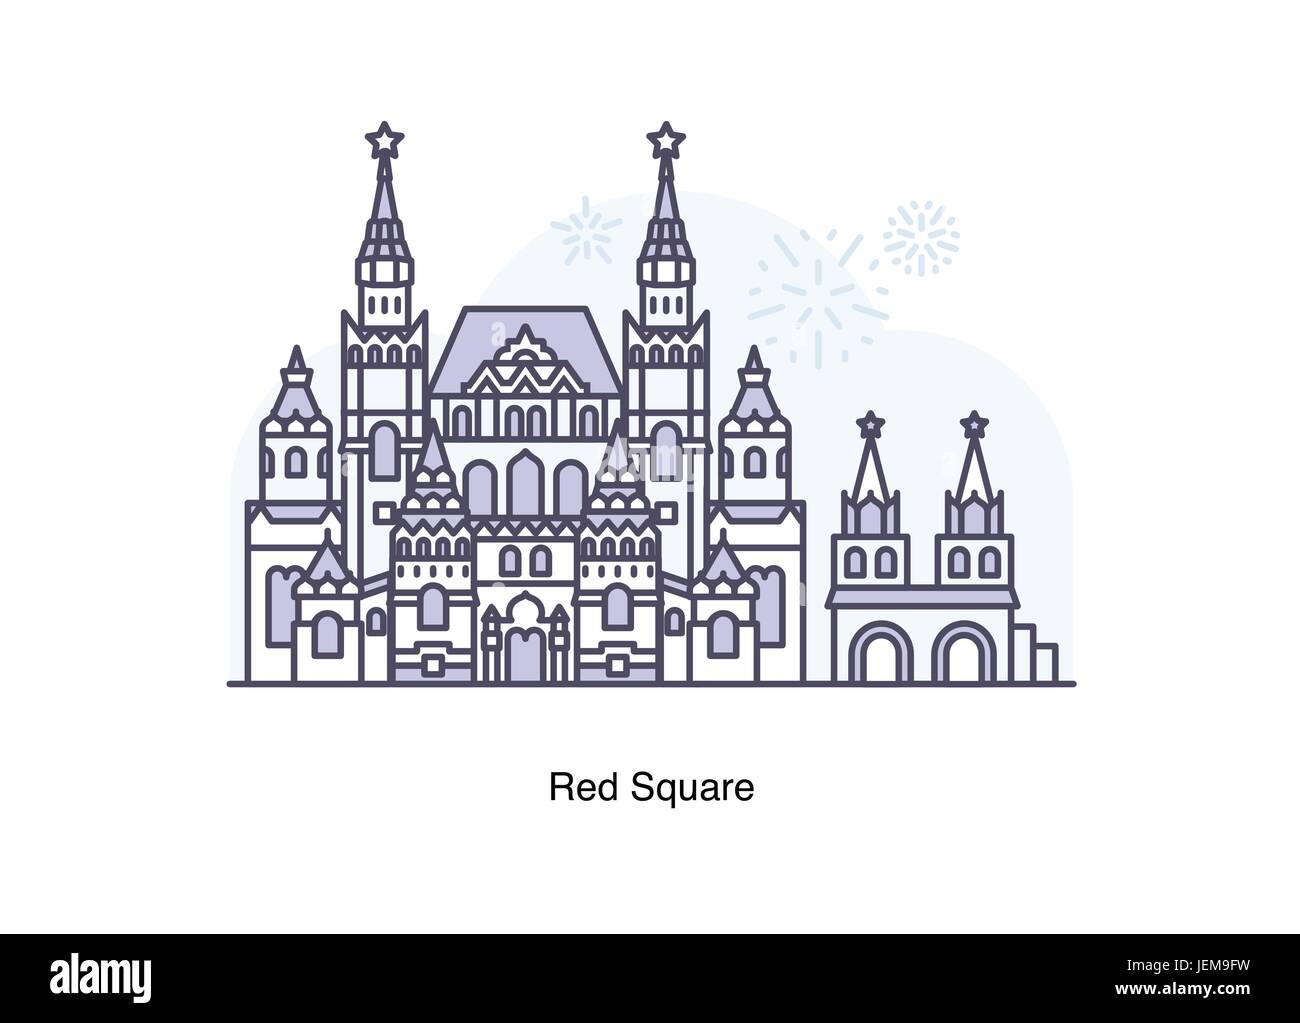 Vector line illustration of Red Square (Krasnaya ploshchad) , Moscow, Russia. Stock Vector